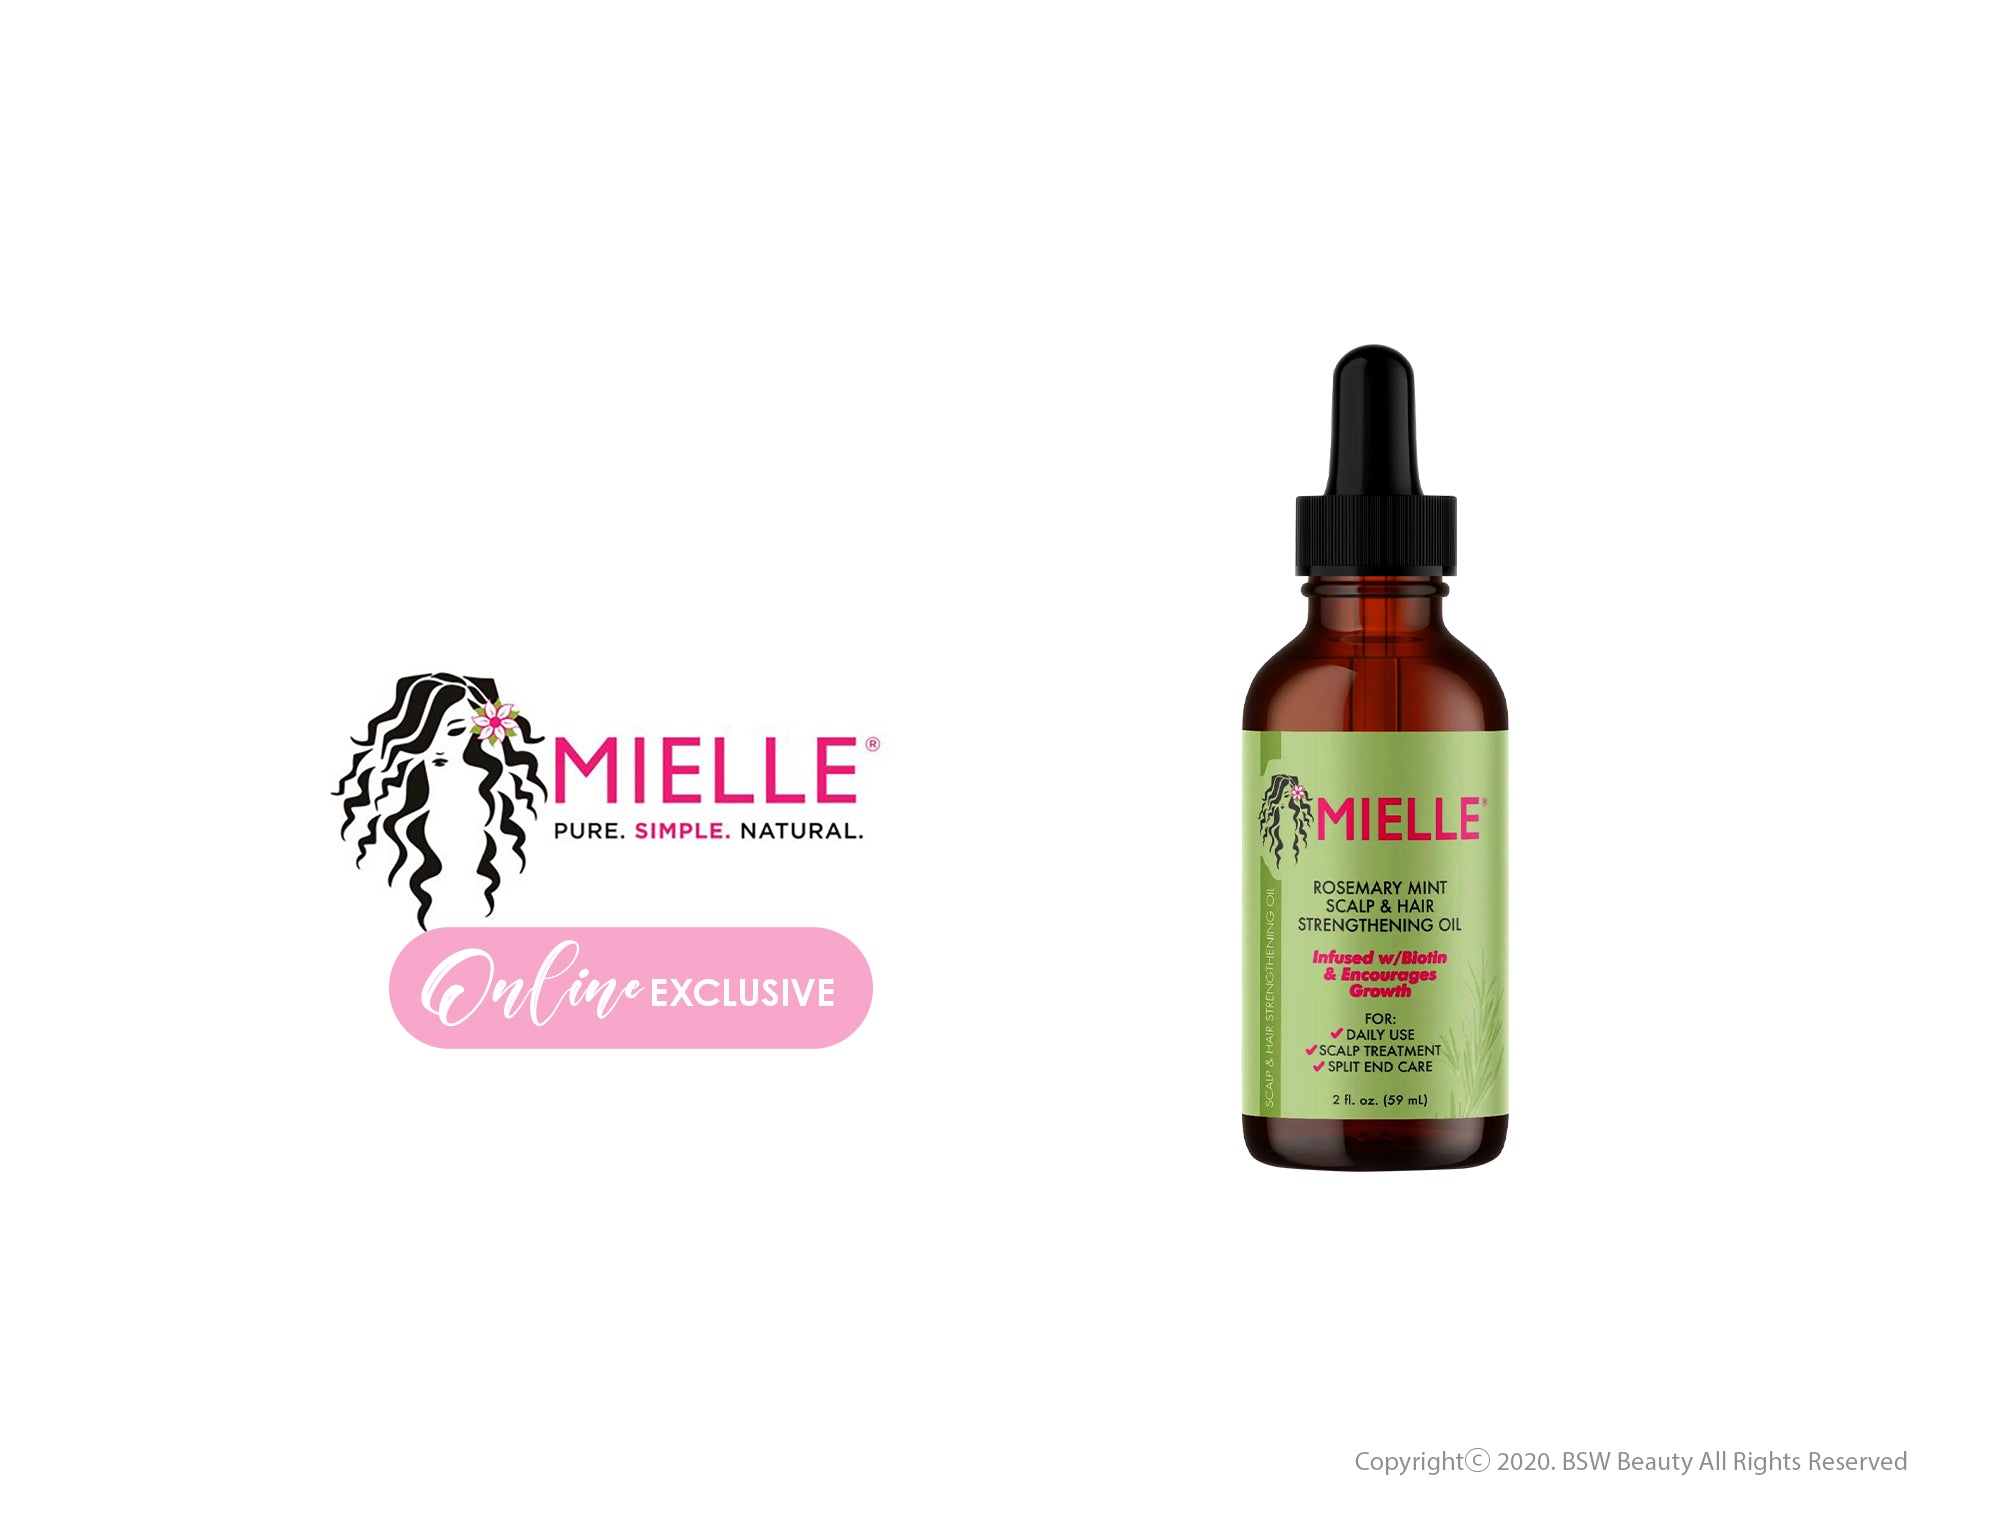 MIELLE ROSEMARY MINT SCALP & HAIR STRENGTHENING OIL INFUSED W/ BIOTIN & ENCOURAGES GROWTH 2oz